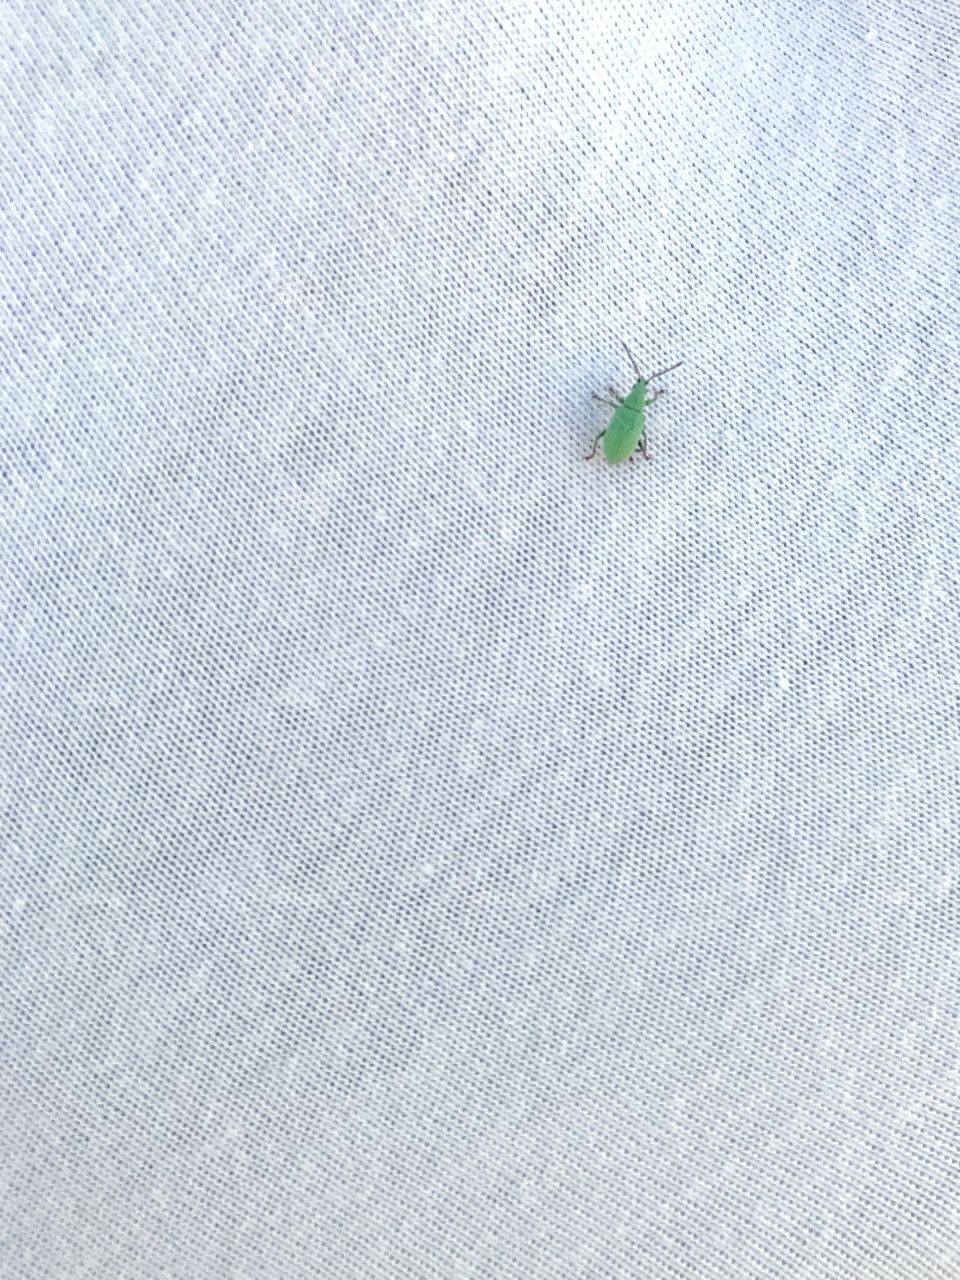 green insect on white 